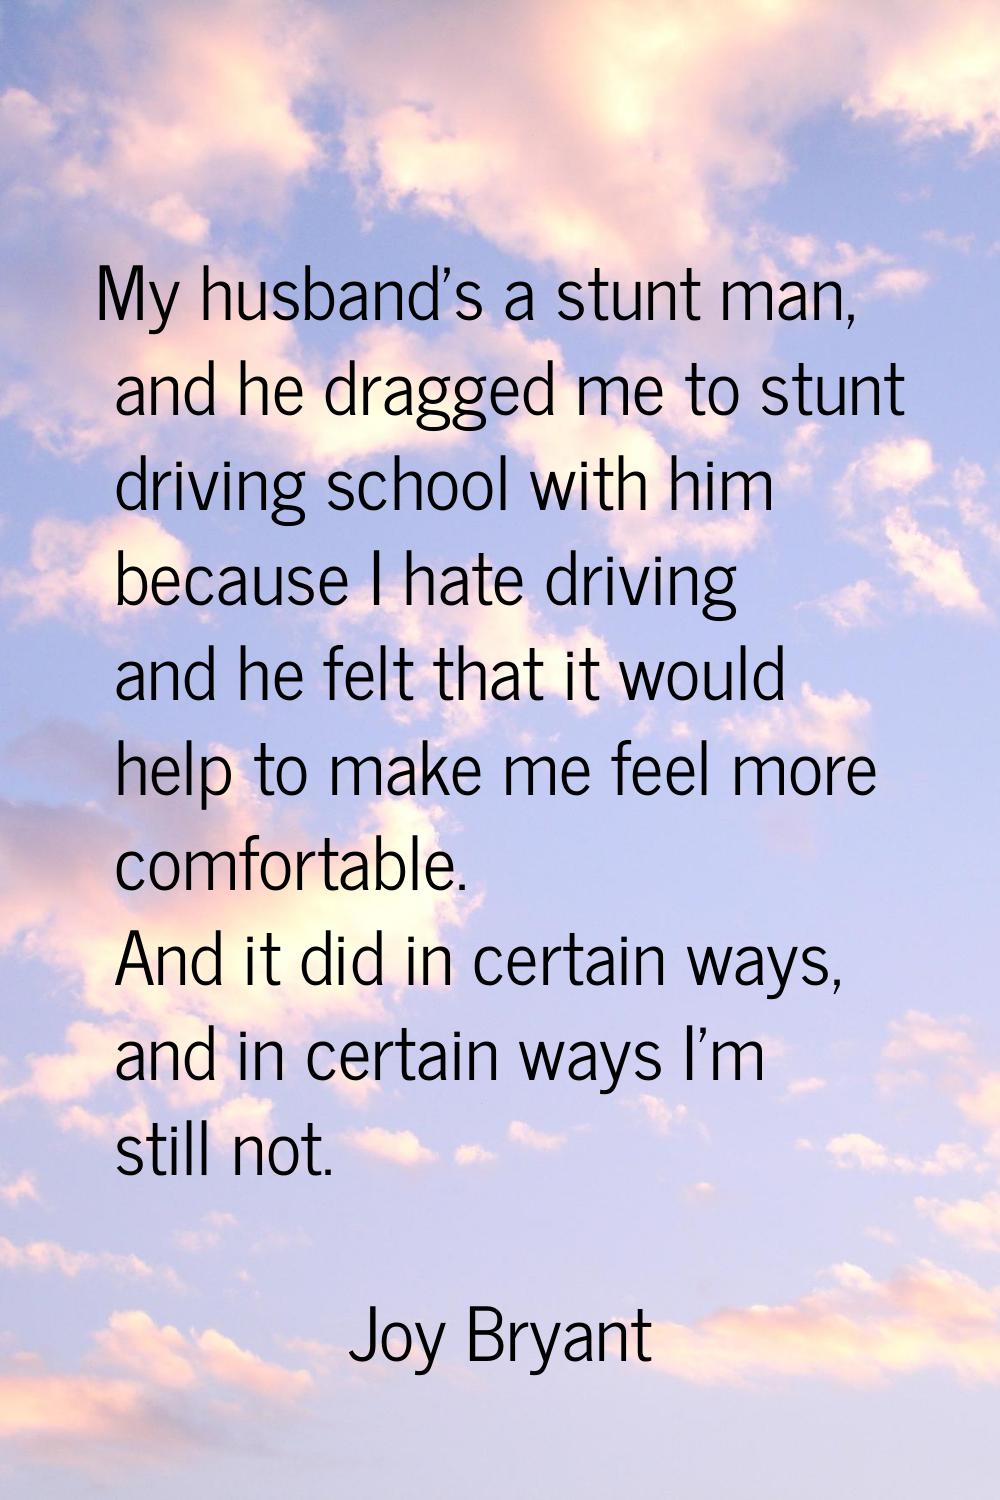 My husband's a stunt man, and he dragged me to stunt driving school with him because I hate driving